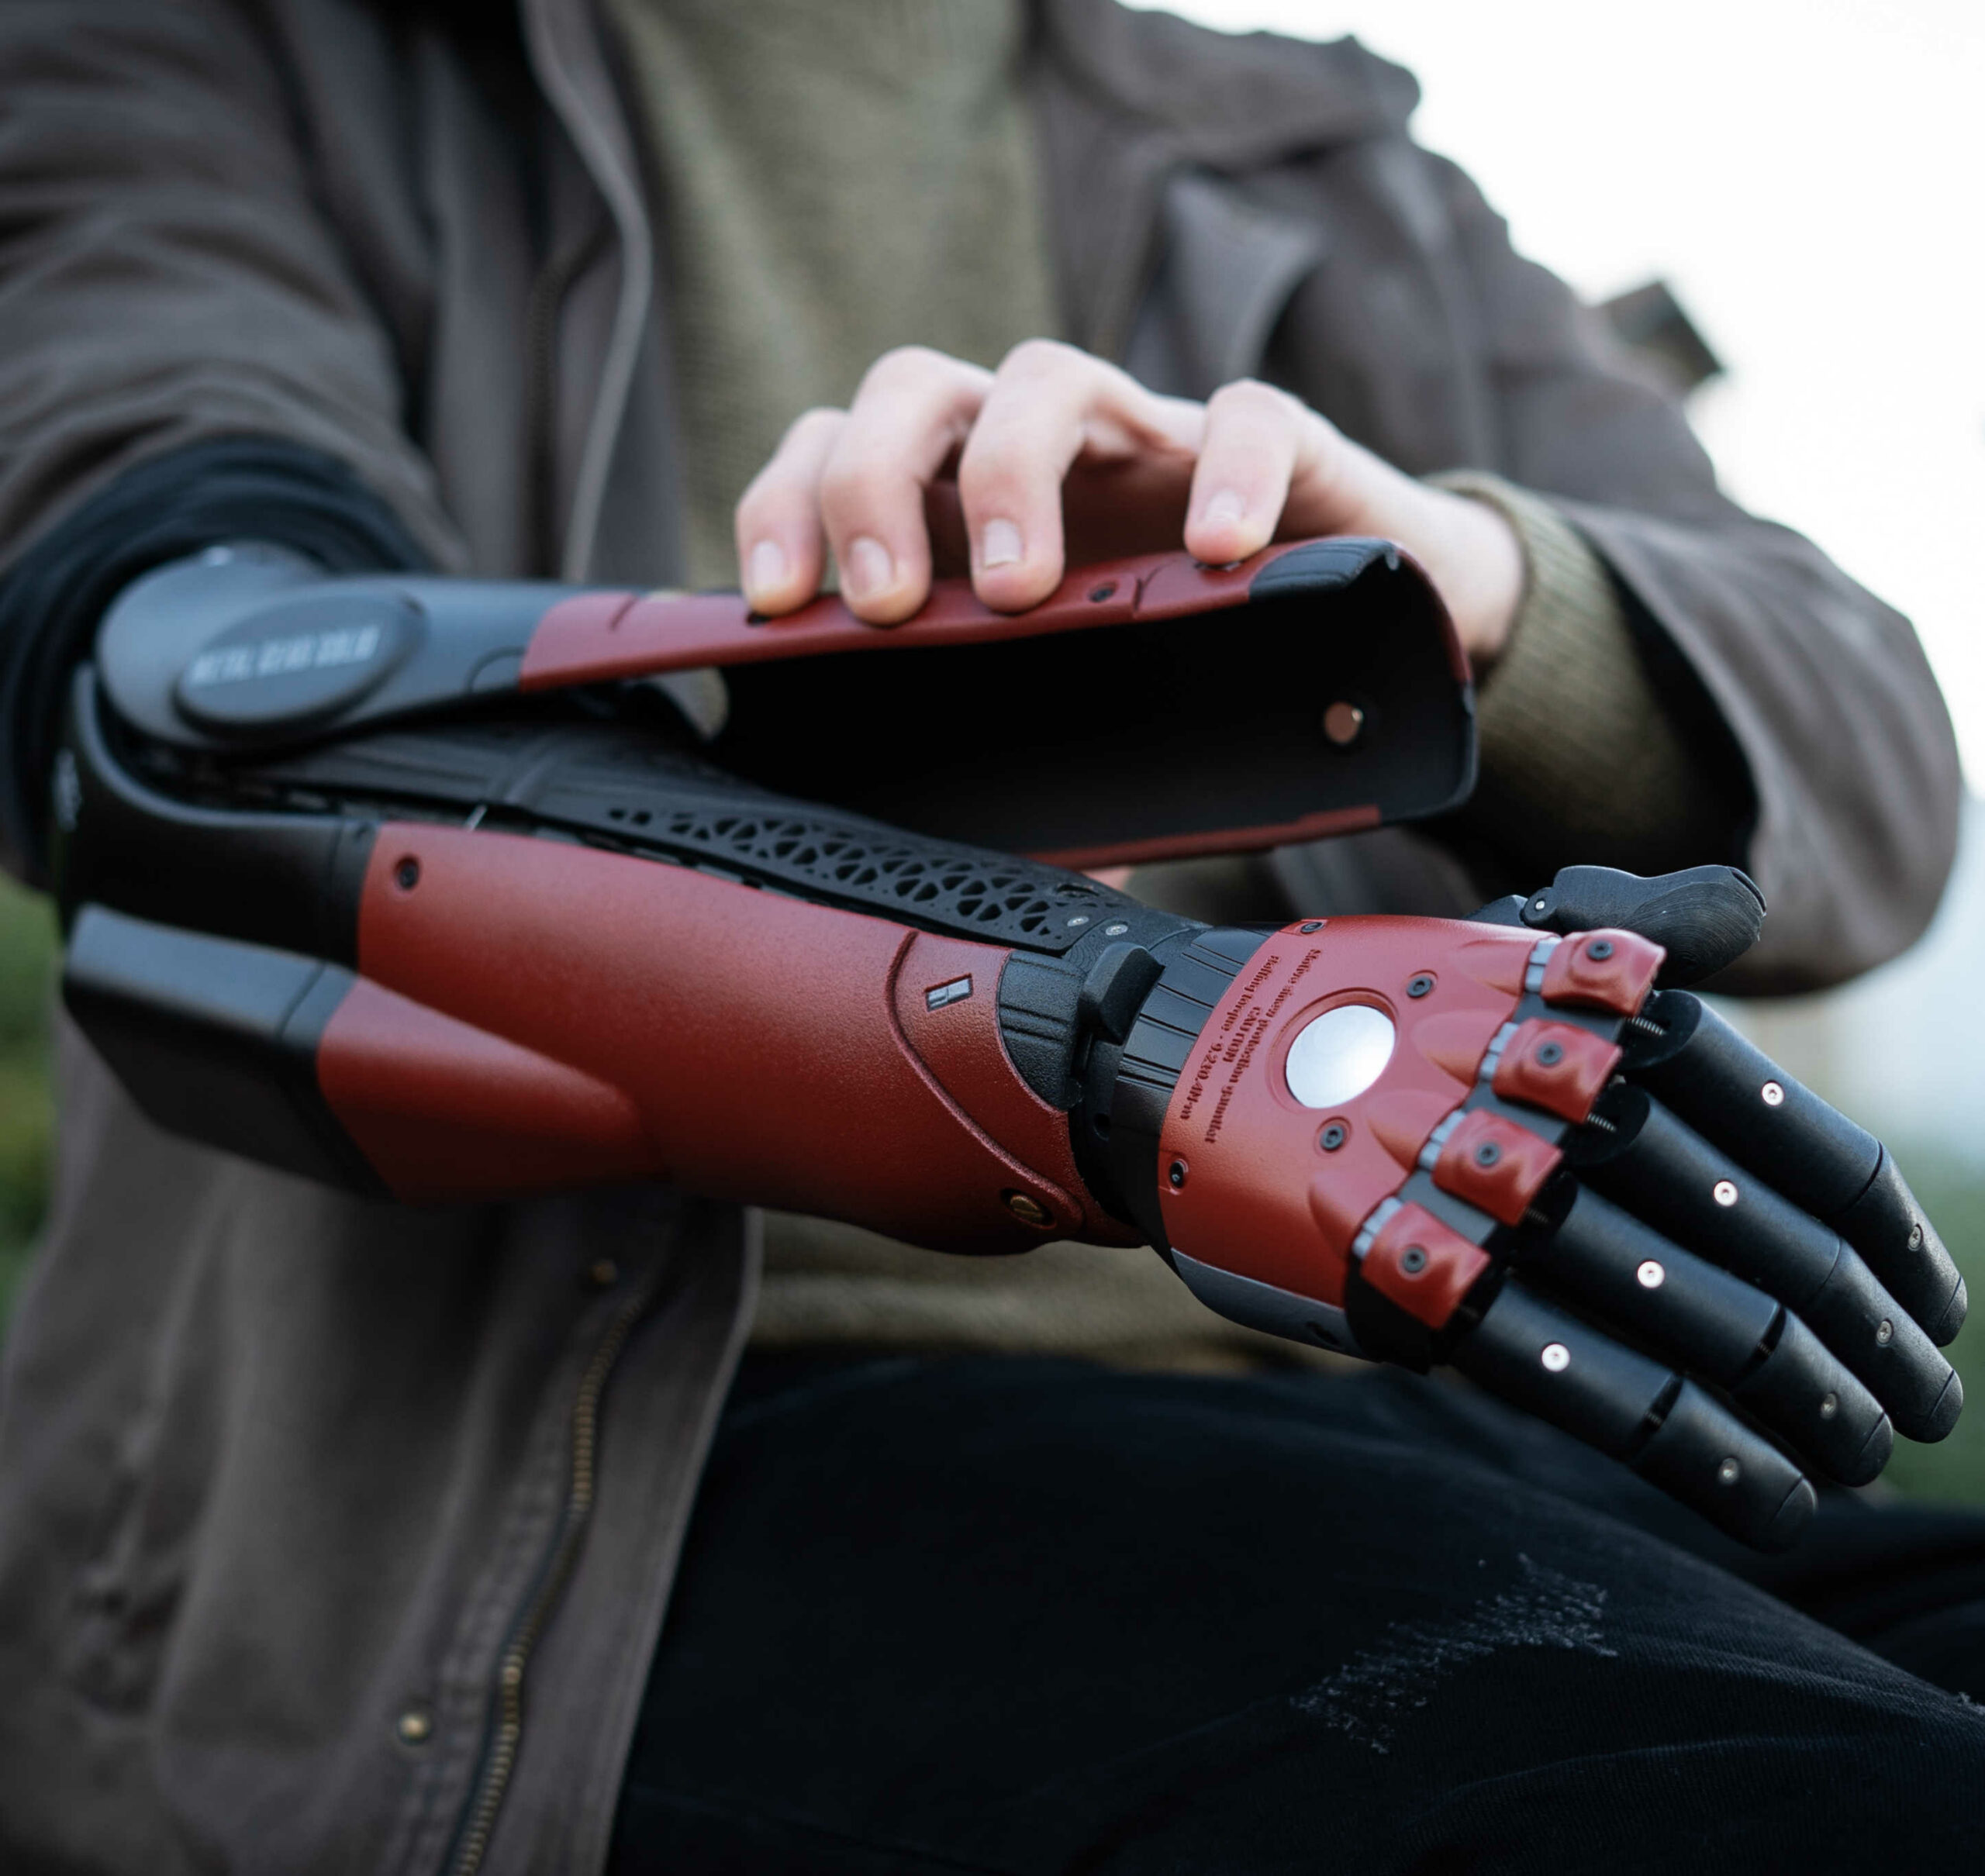 the-hero-arm-is-a-prosthetic-arm-made-by-open-bionics